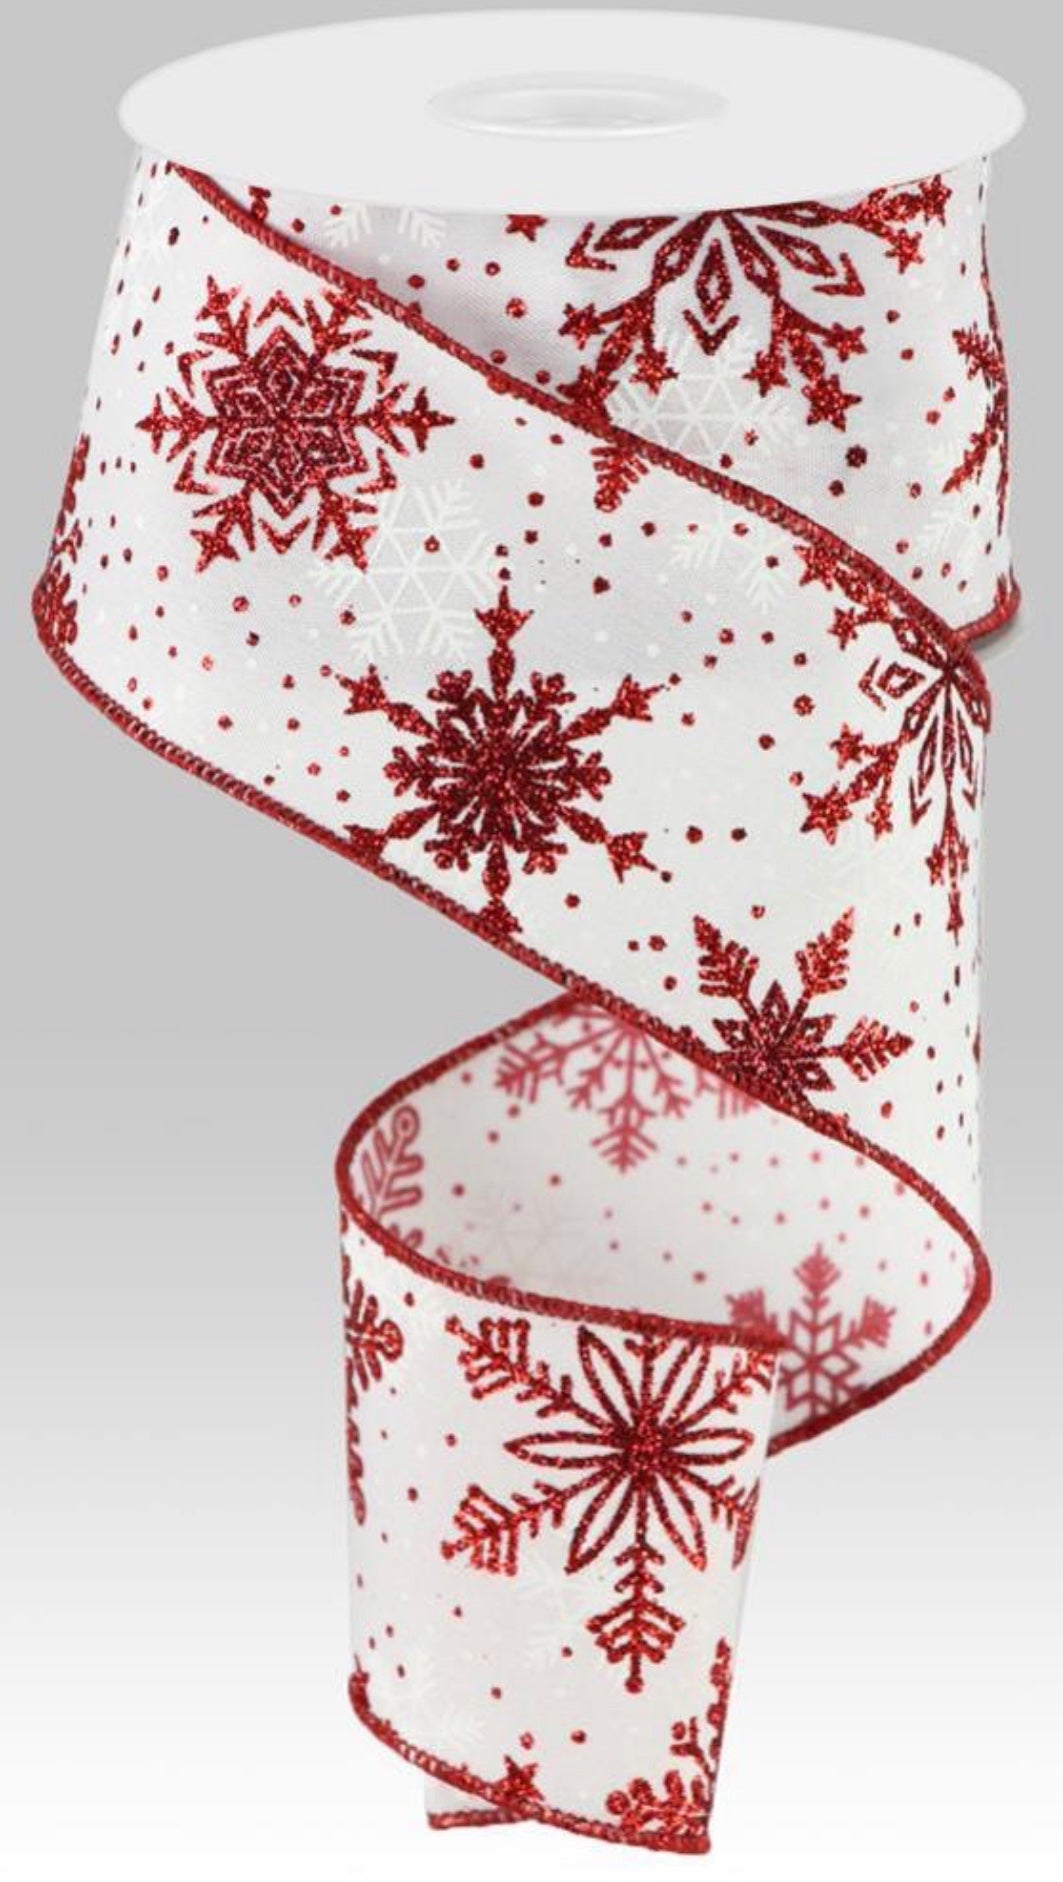 10 Yards - 1.5” Wired Red and White Glitter Snowflake Ribbon